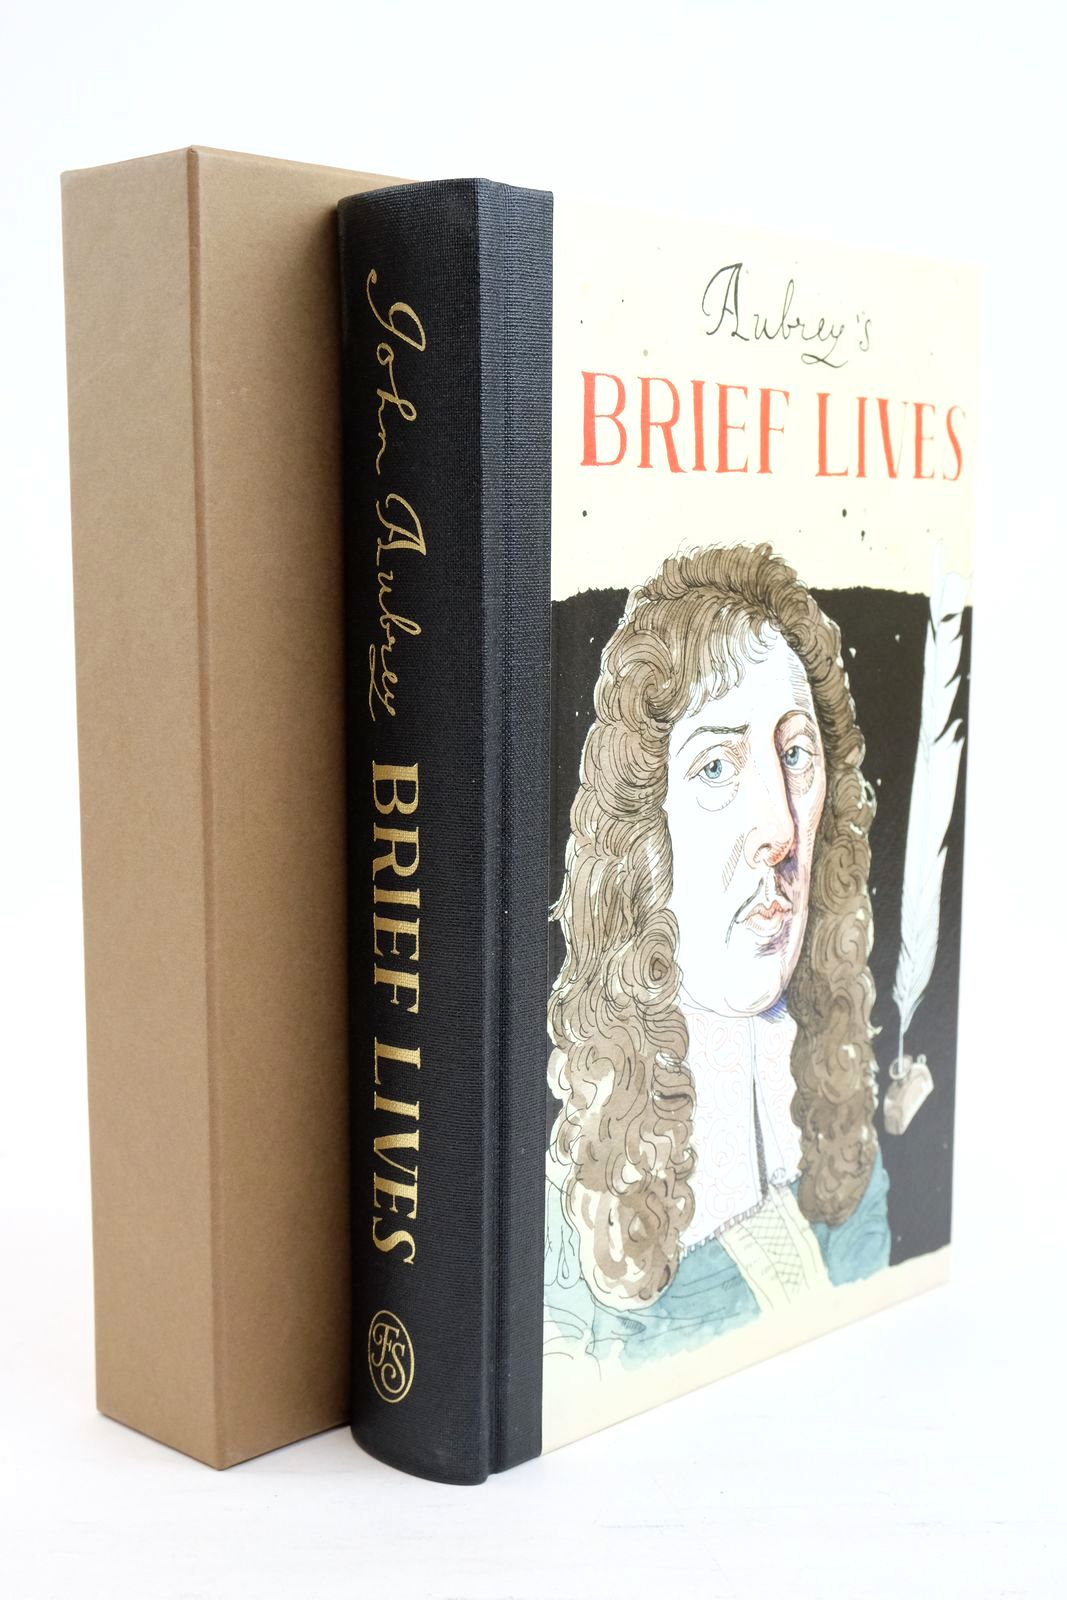 Photo of BRIEF LIVES written by Aubrey, John Dick, Oliver Lawson Conrad, Peter illustrated by Ciardiello, Joseph published by Folio Society (STOCK CODE: 1320862)  for sale by Stella & Rose's Books